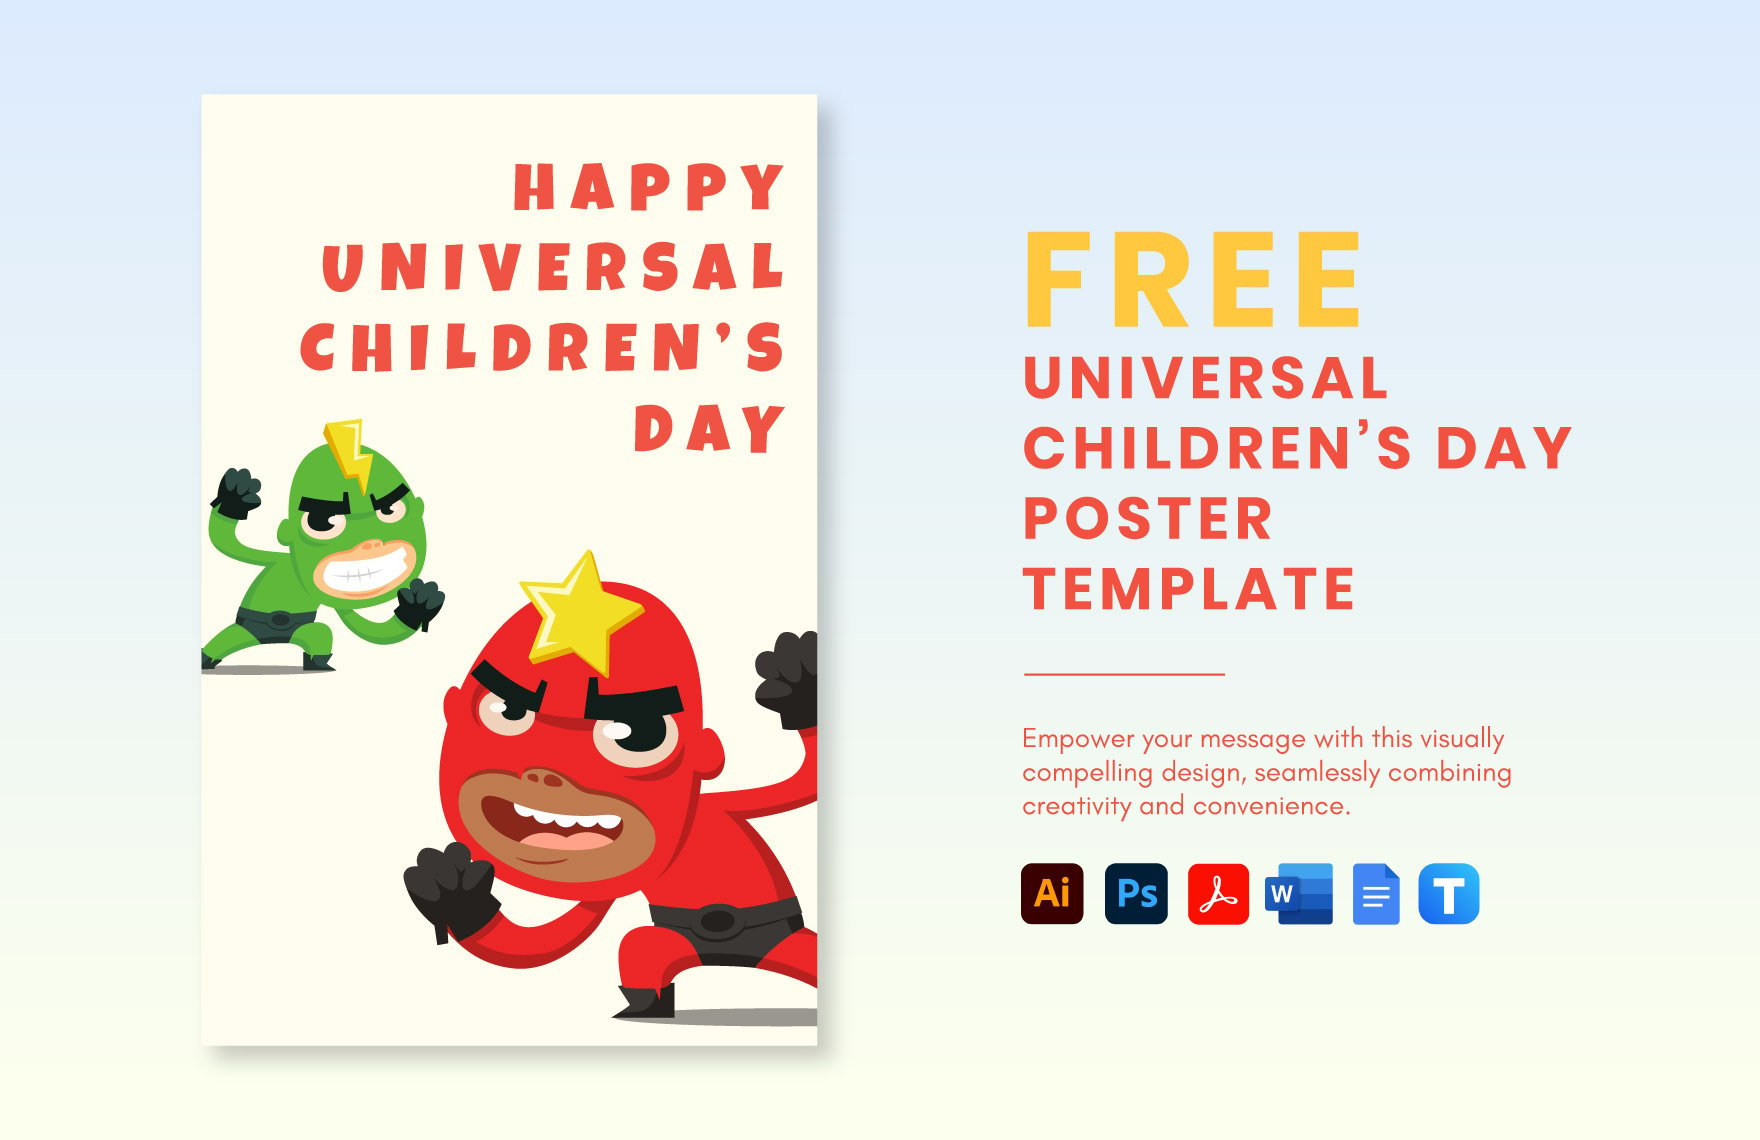 Universal Children’s Day Poster Template